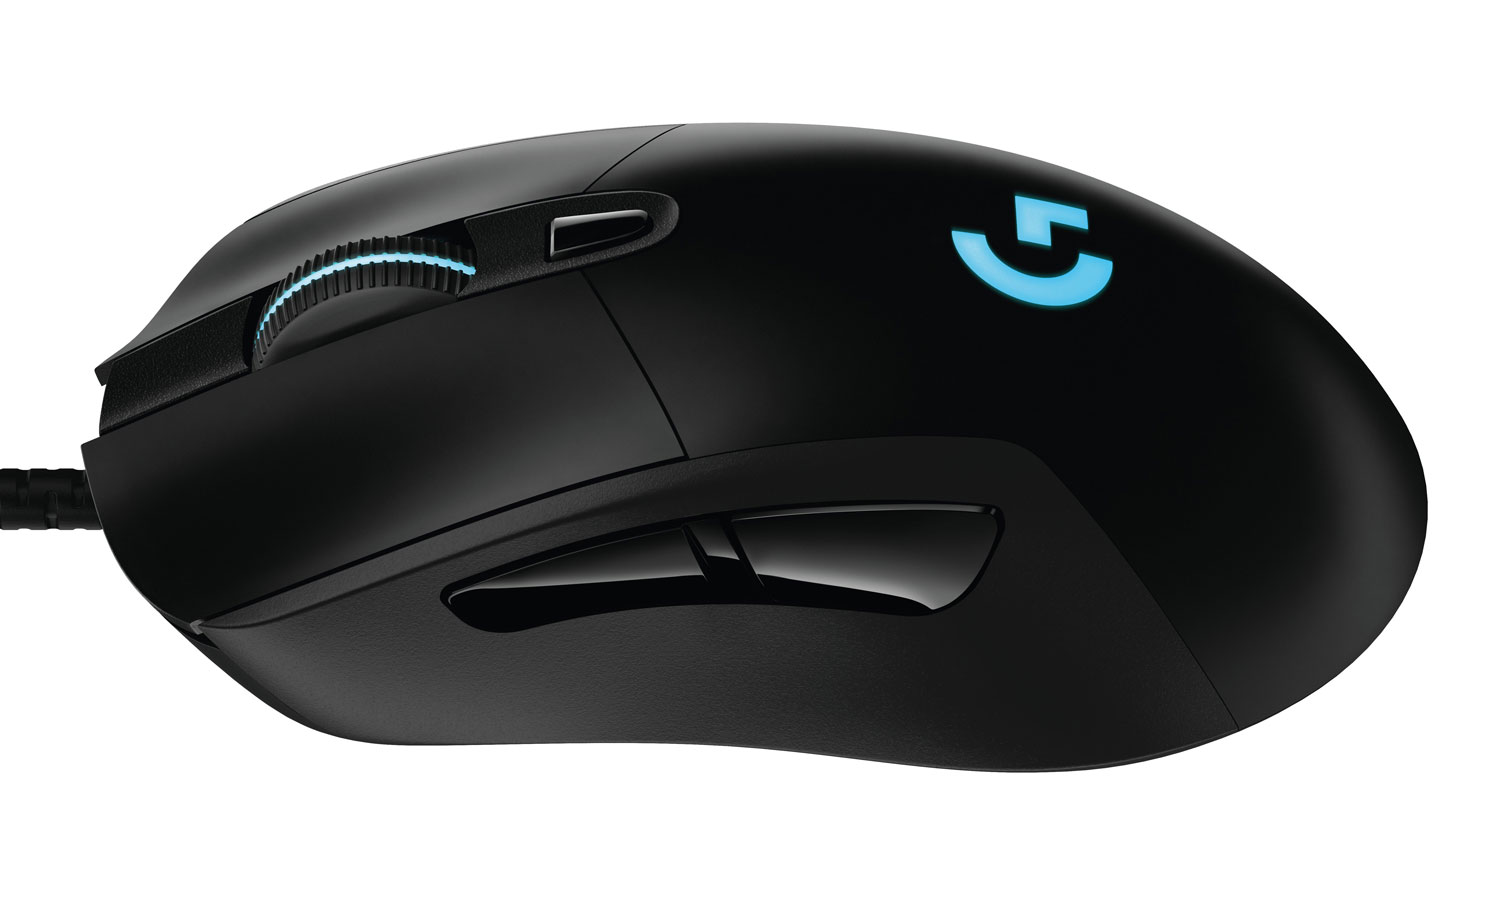 Logitech G403 Prodigy Review: Just Gaming Mouse | Guide